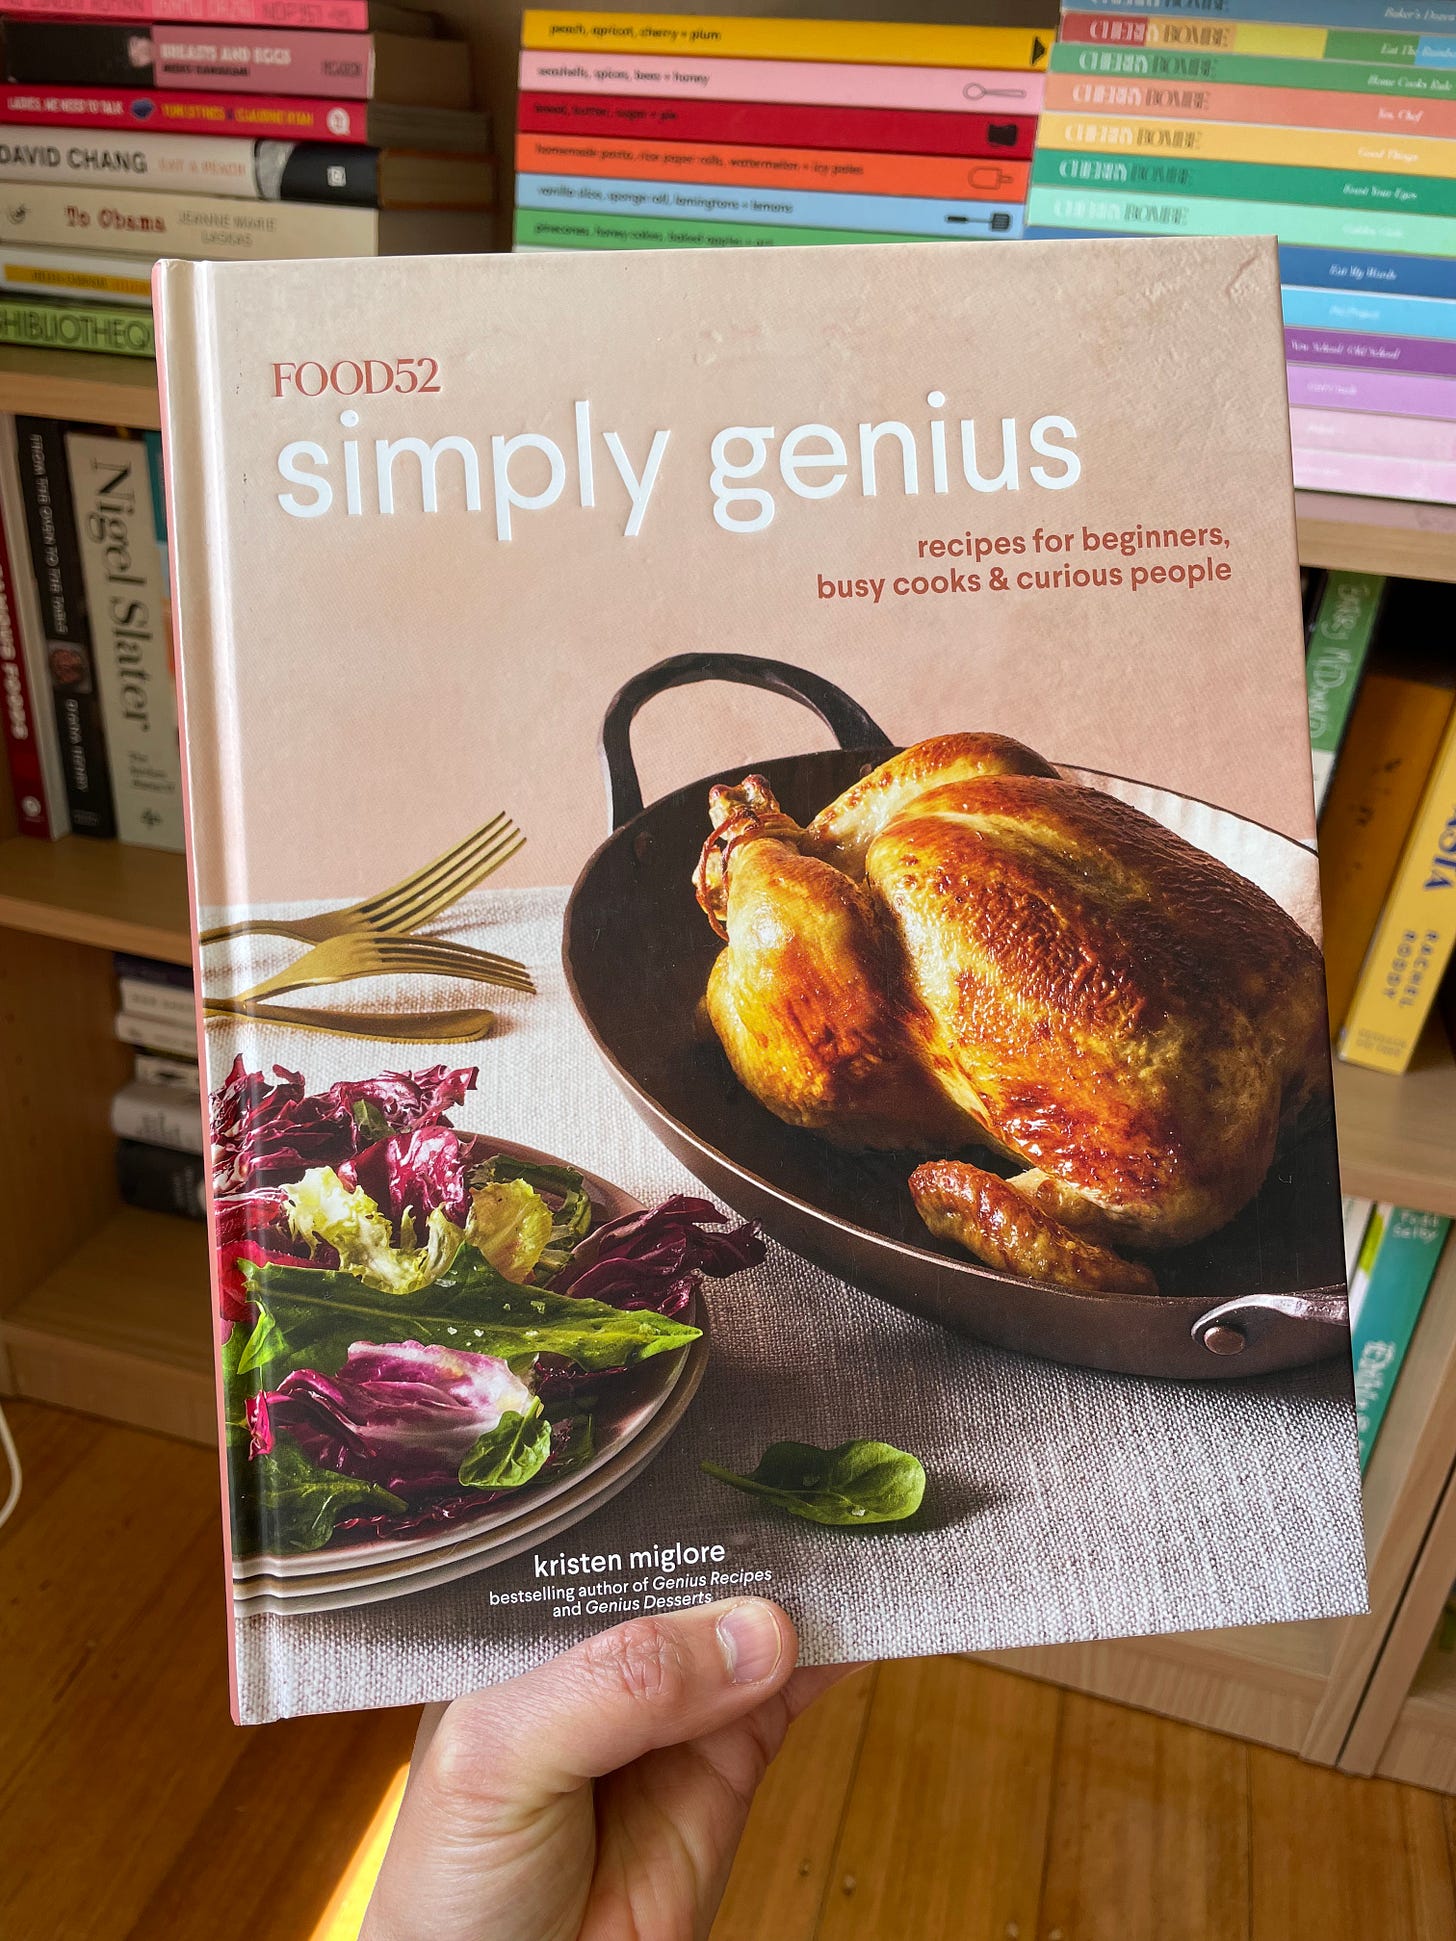 Food52 Simply Genius cookbook in front of a bookshelf filled with food magazines and books.